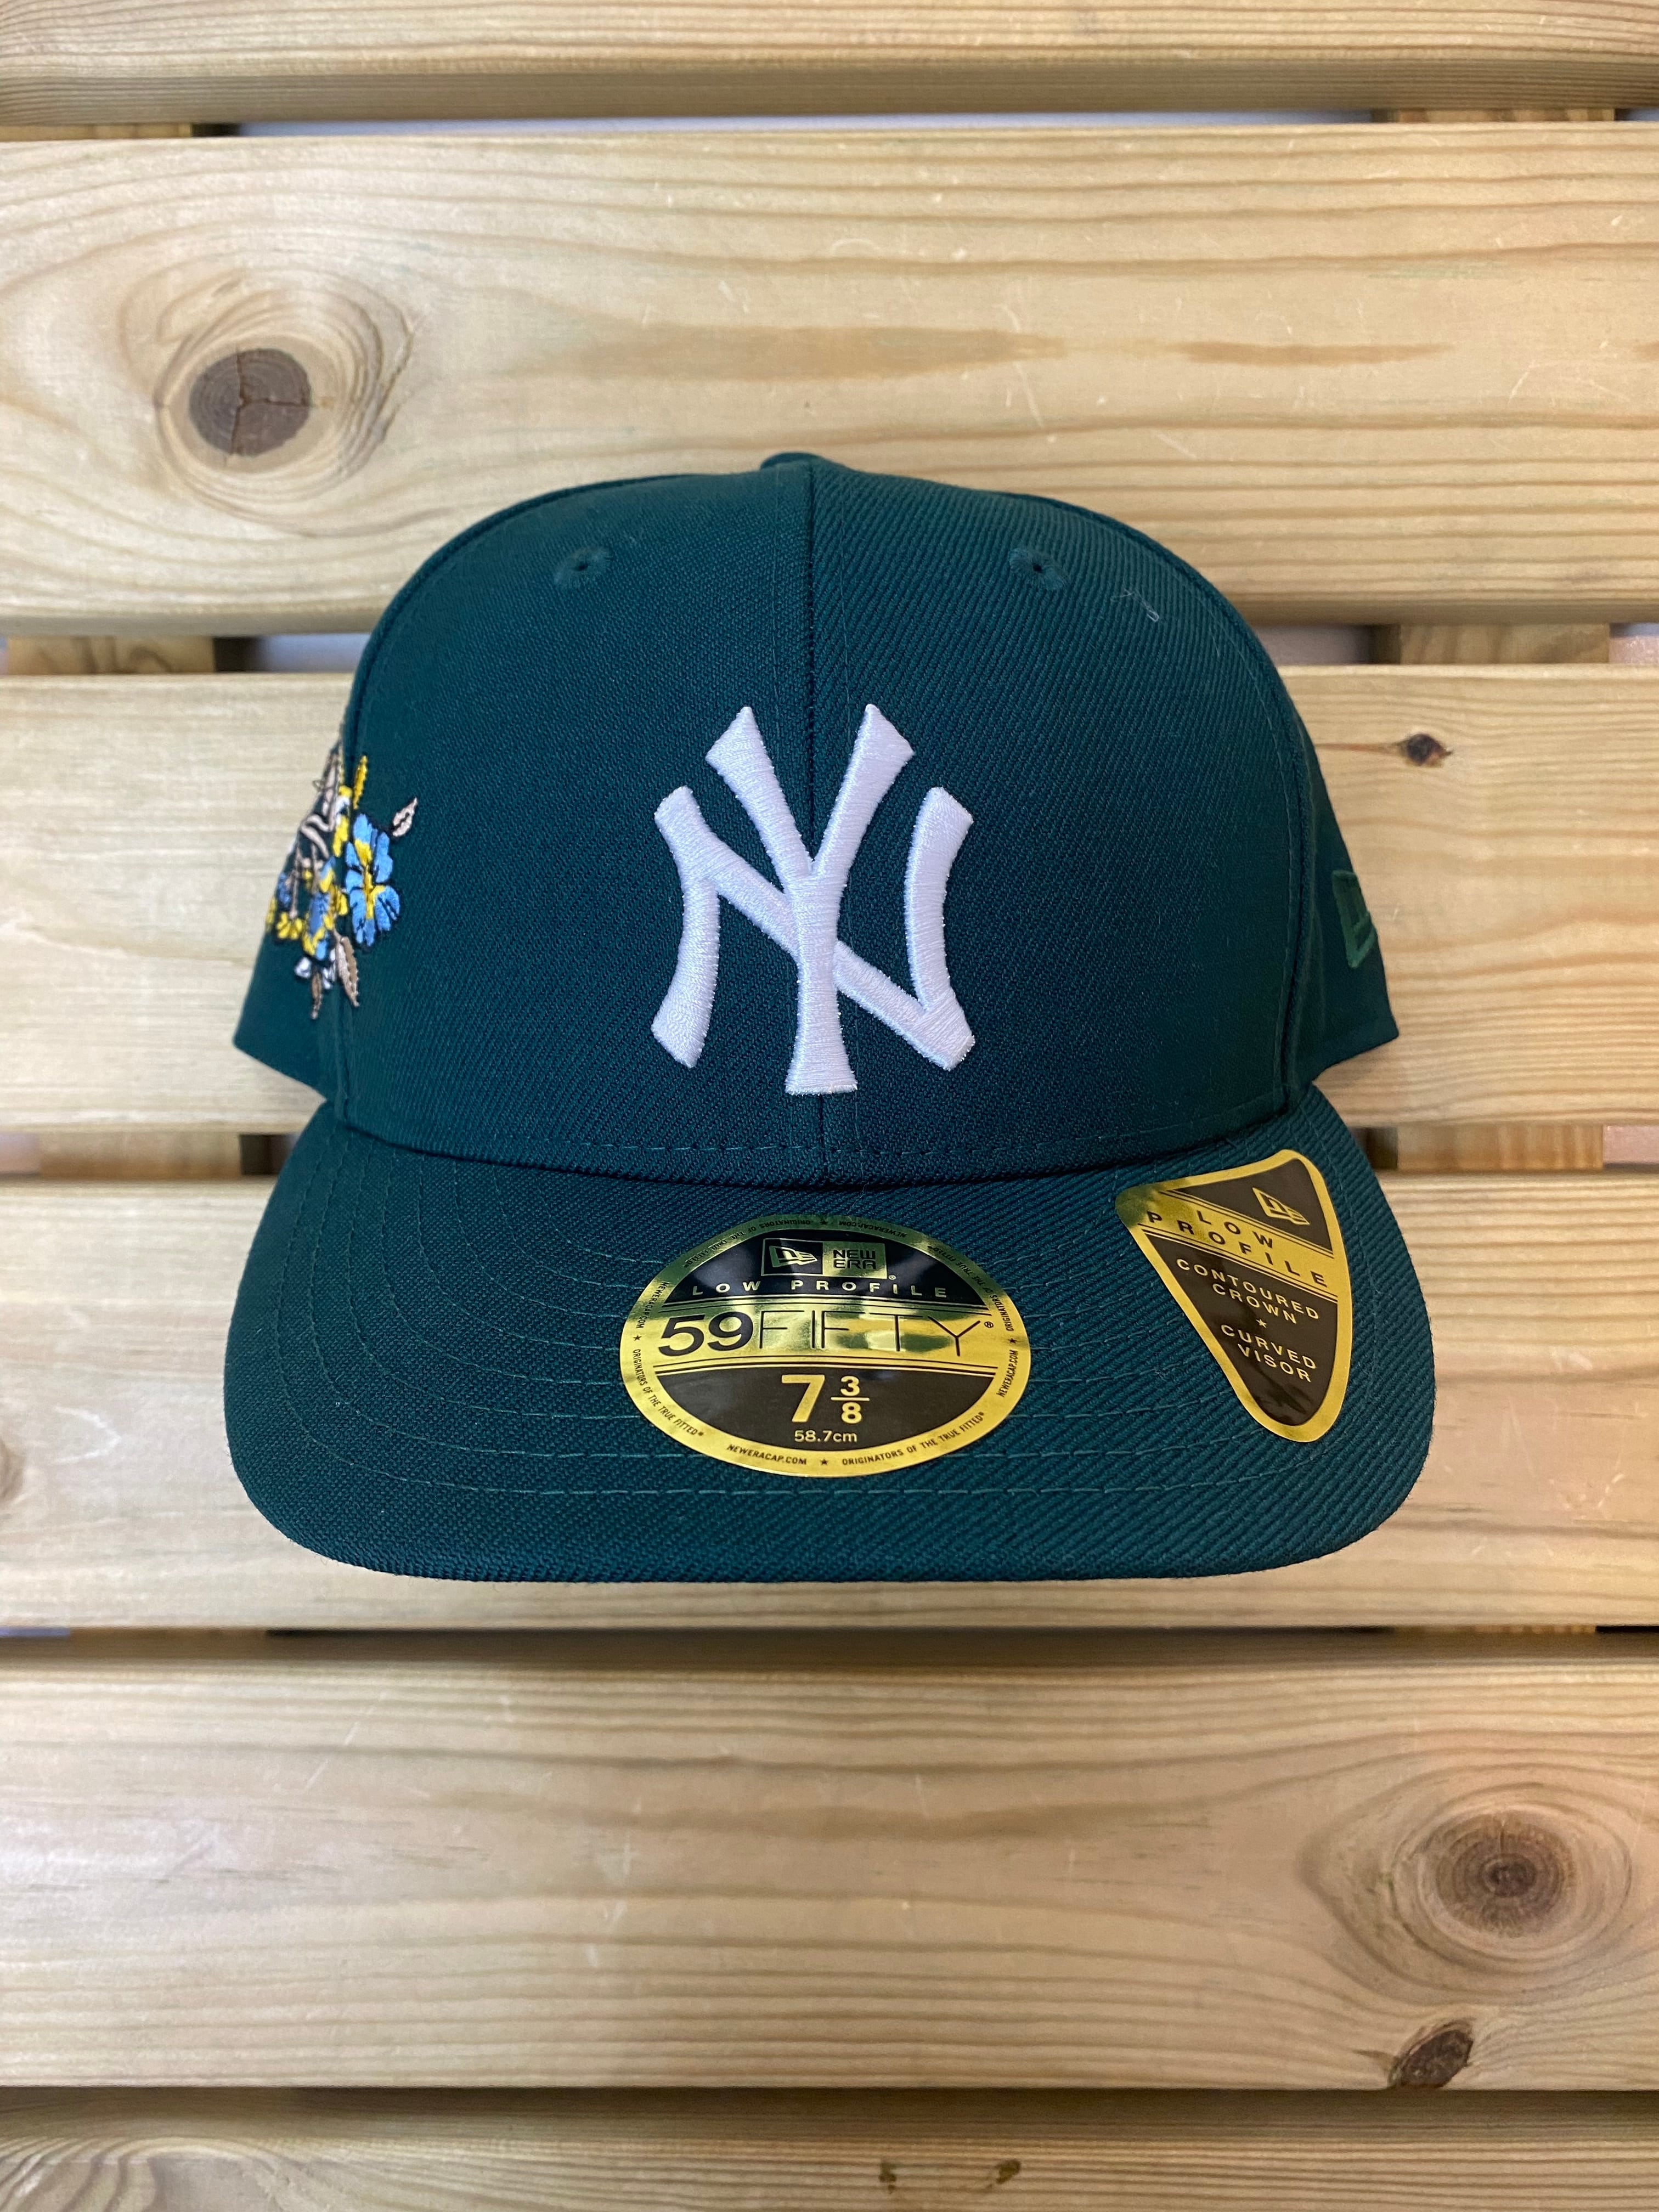 KITH × NEW ERA NEW YORK YANKEES FLORAL LOW CROWN FITTED CAP 7 3/8